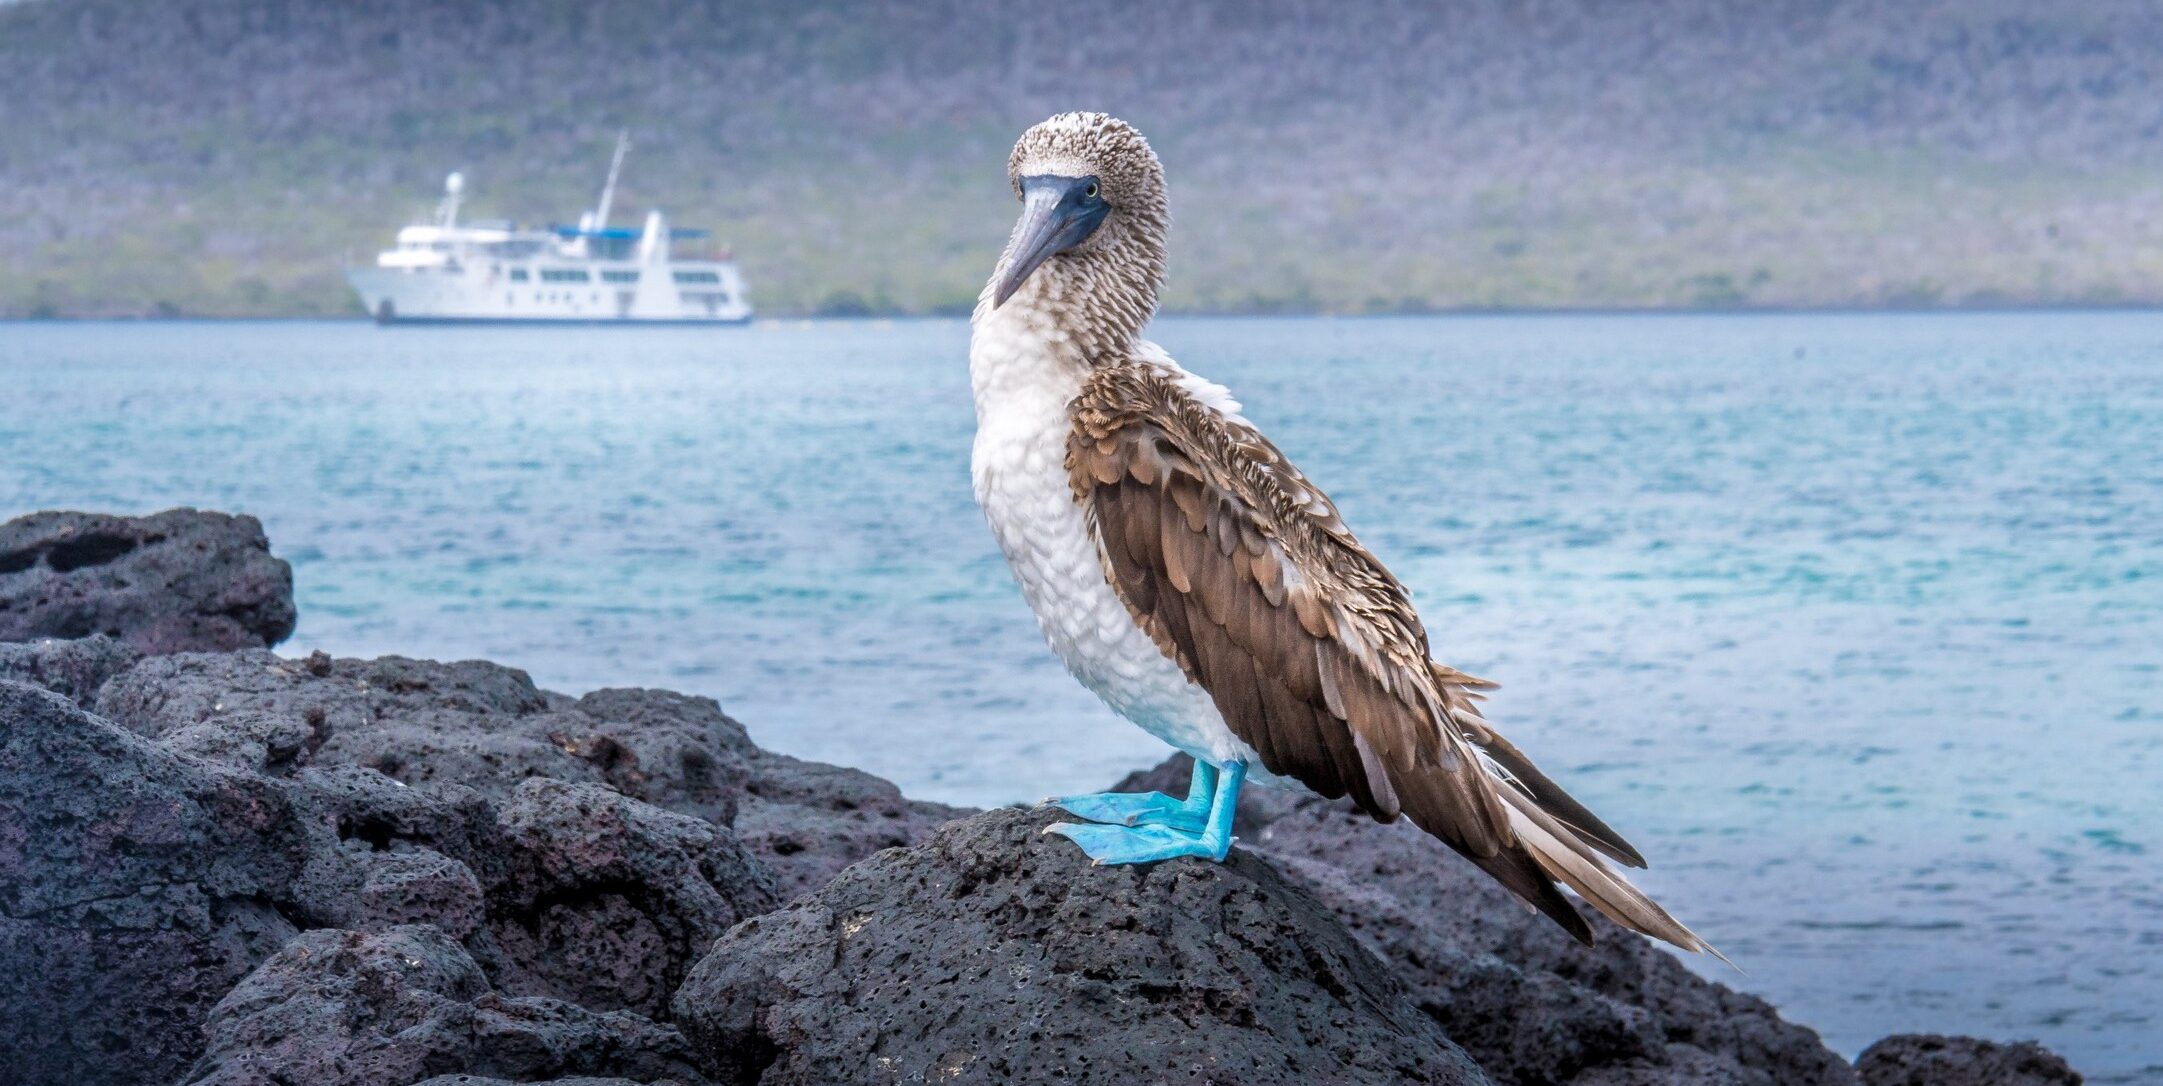 Galapagos: Blue footed booby